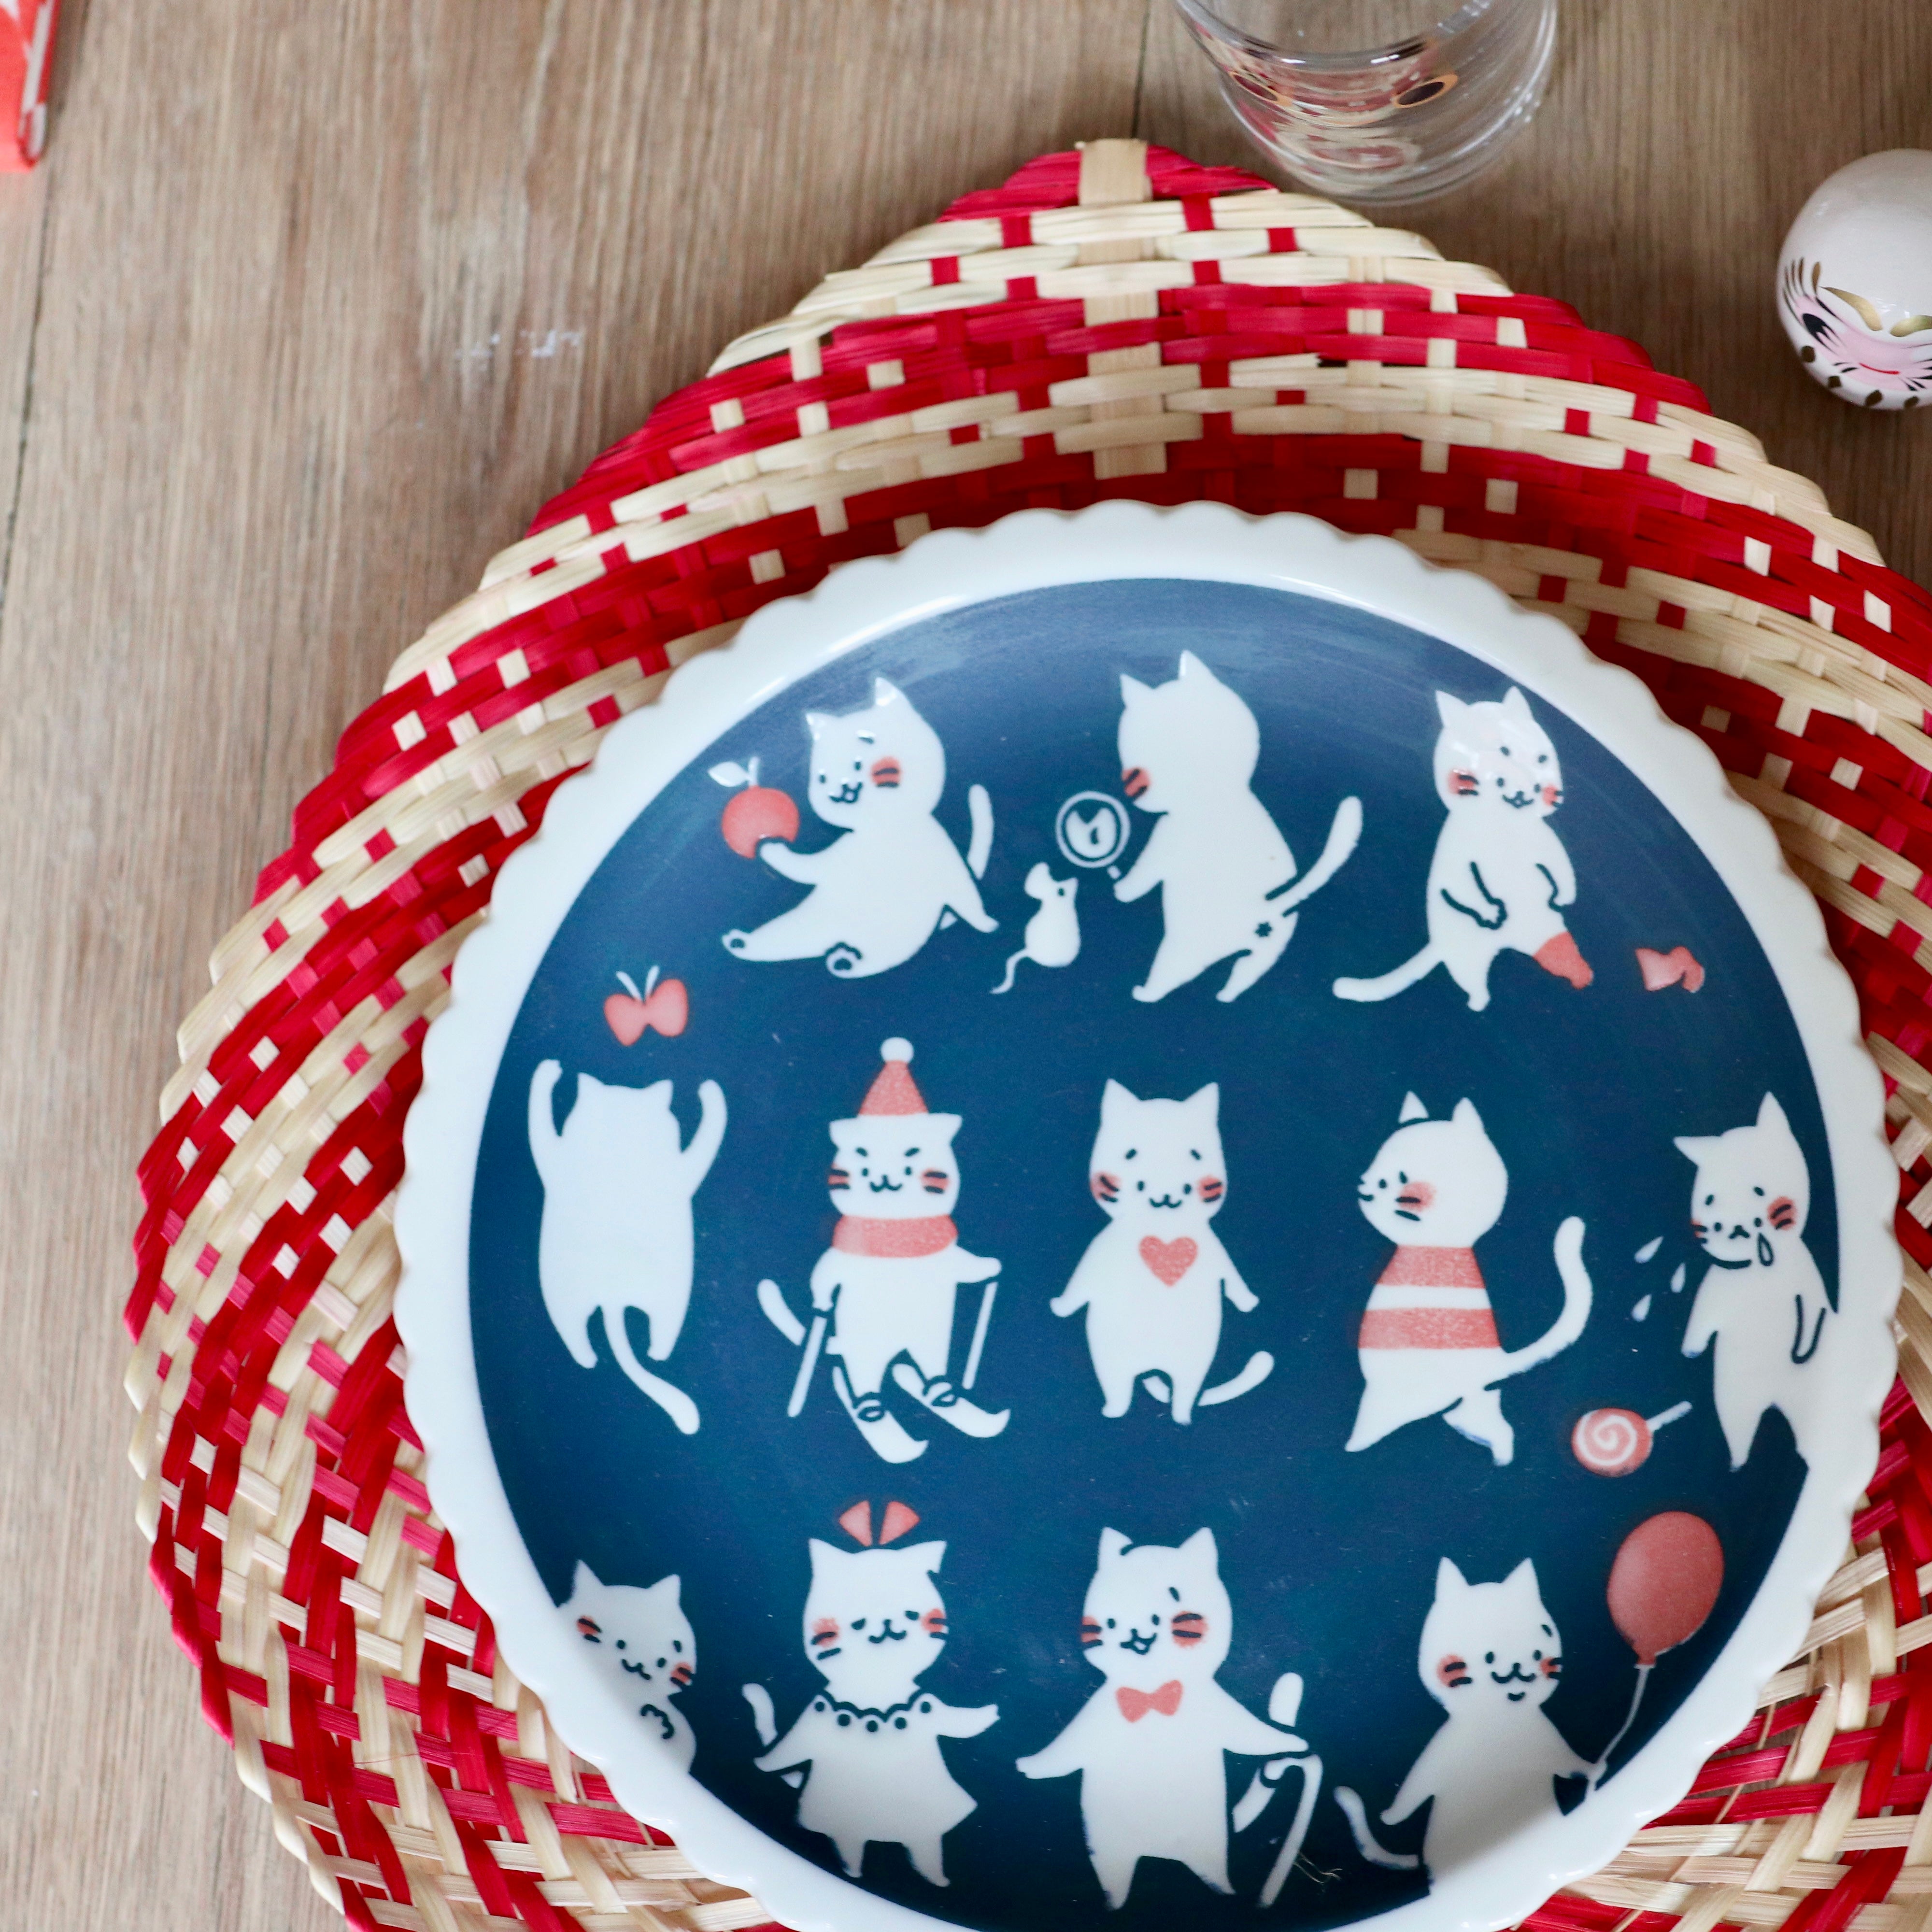 Japanese plate with different cats